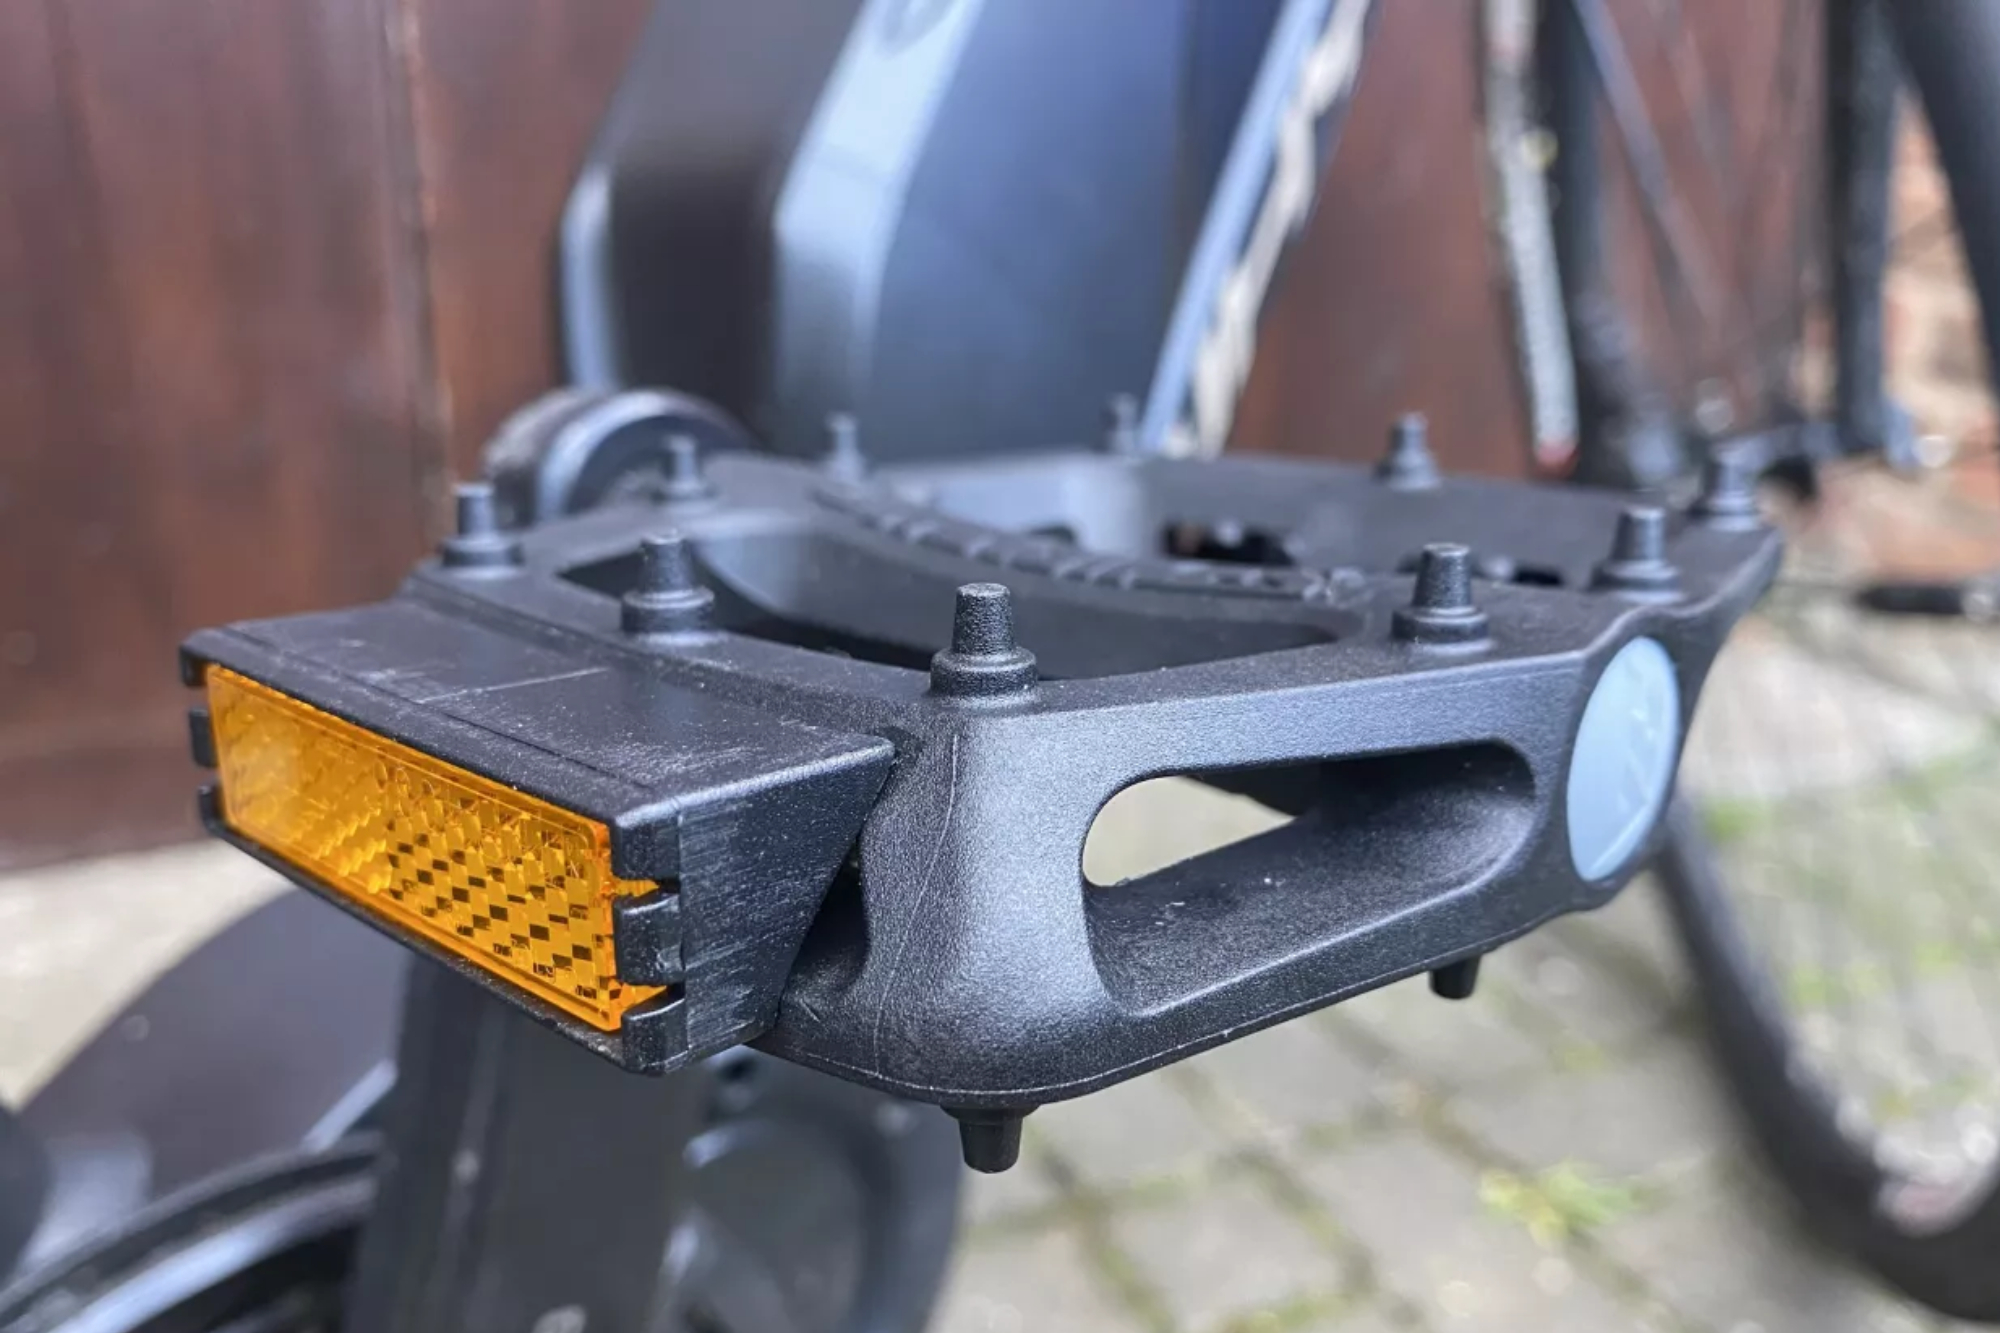 Image shows the DMR V6 flat pedals mounted on a bike